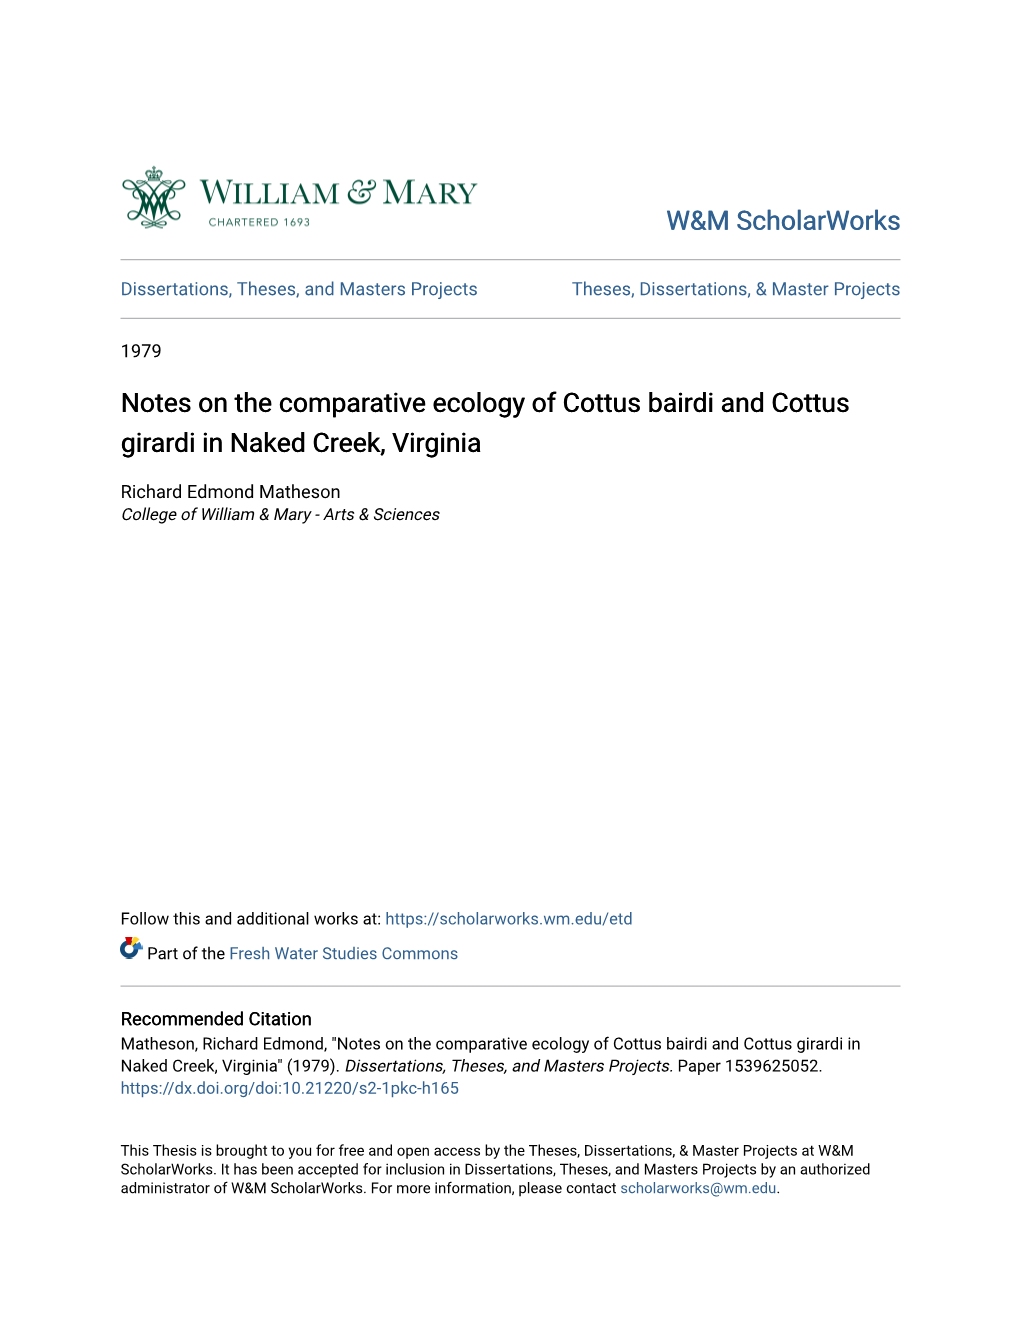 Notes on the Comparative Ecology of Cottus Bairdi and Cottus Girardi in Naked Creek, Virginia